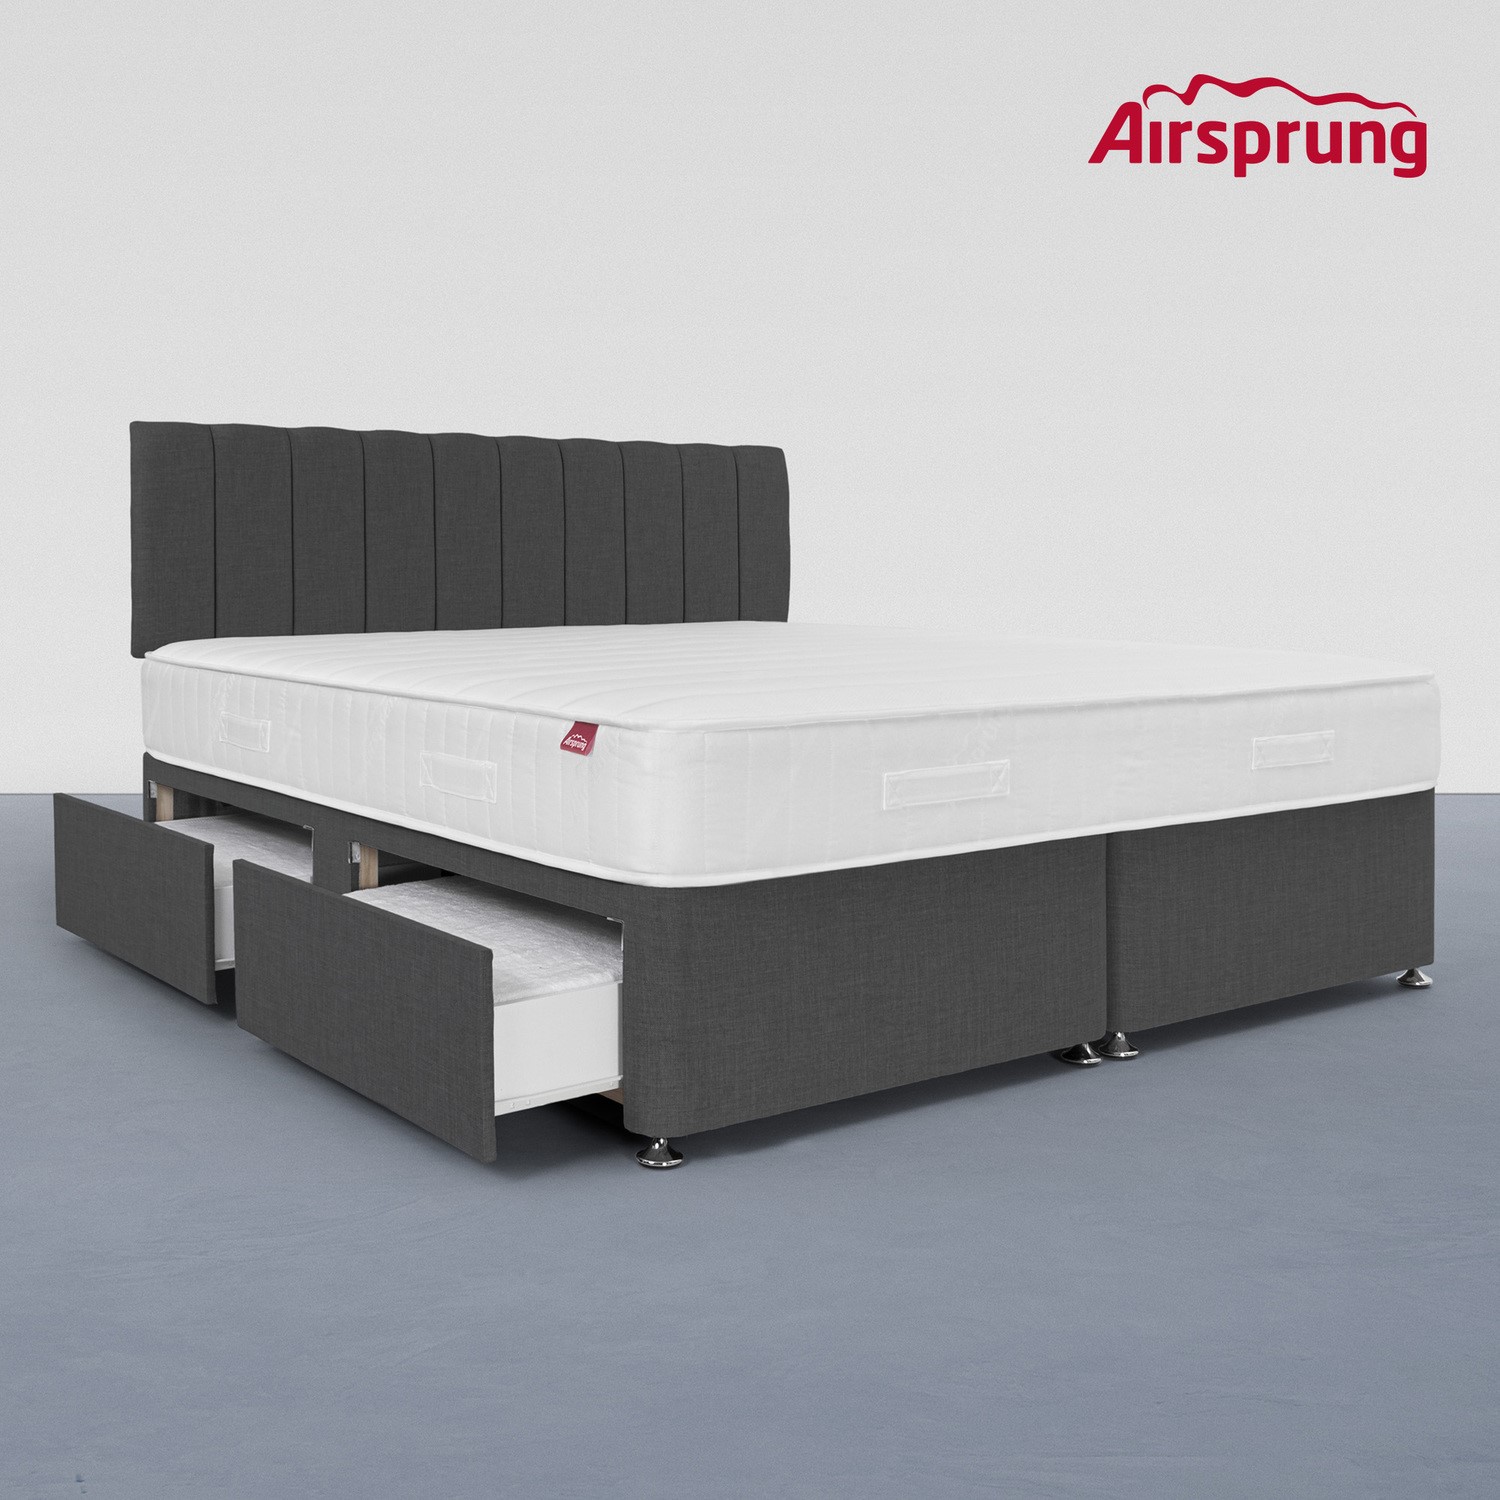 Read more about Airsprung super king 4 drawer divan bed with hybrid mattress charcoal